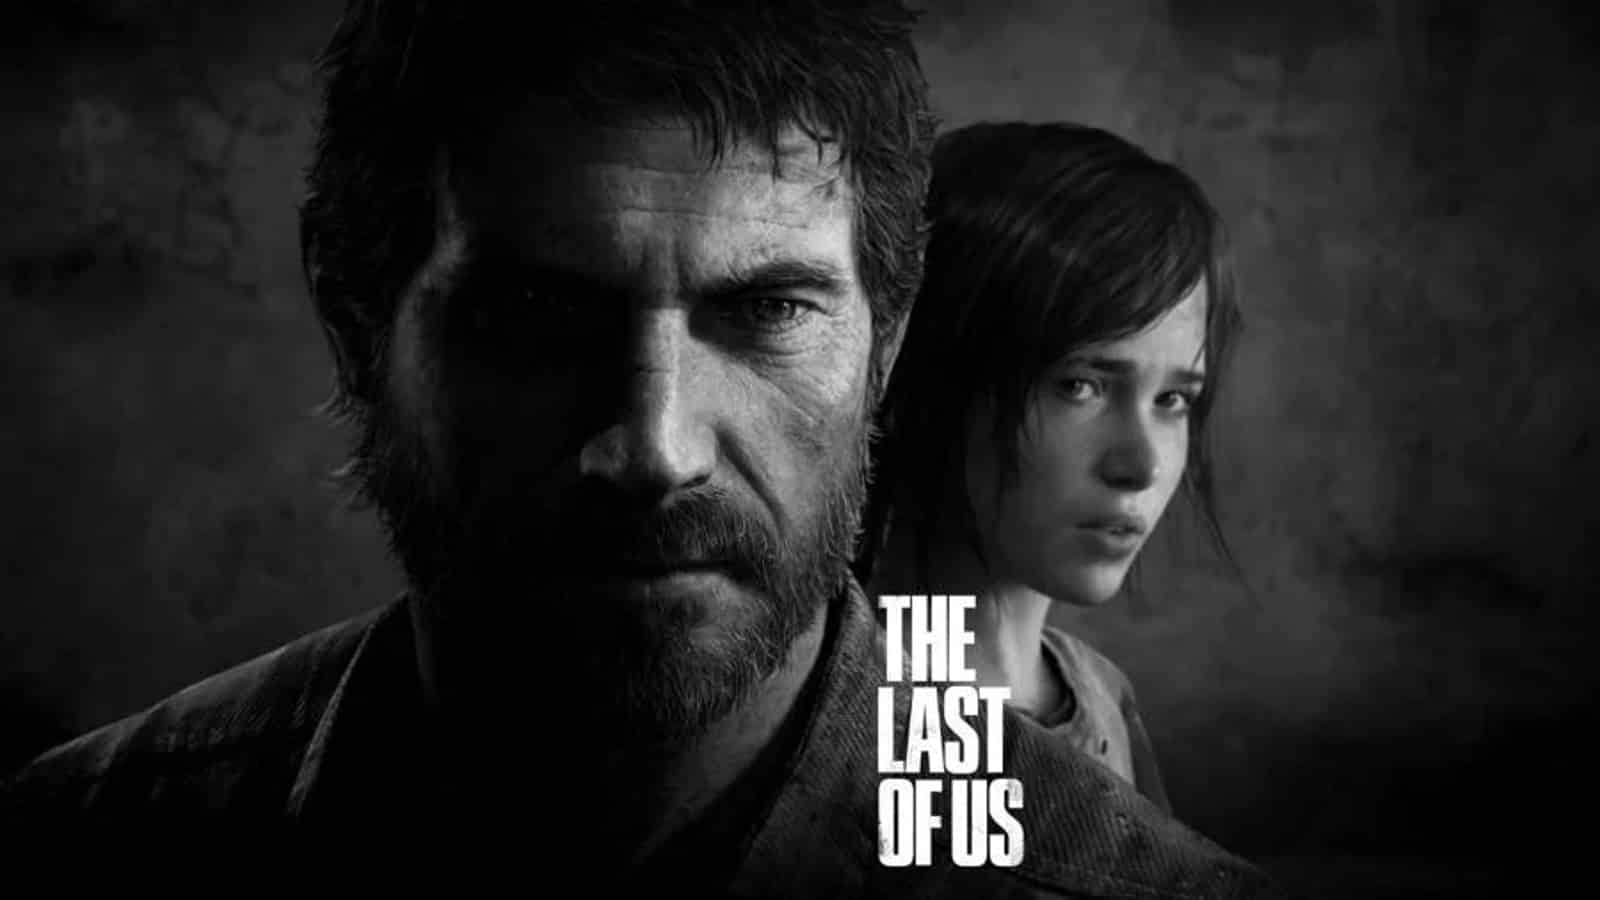 Neil Druckmann confirms Troy Baker & Ashley Johnson playing “undisclosed”  roles in The Last of Us HBO series - Dexerto